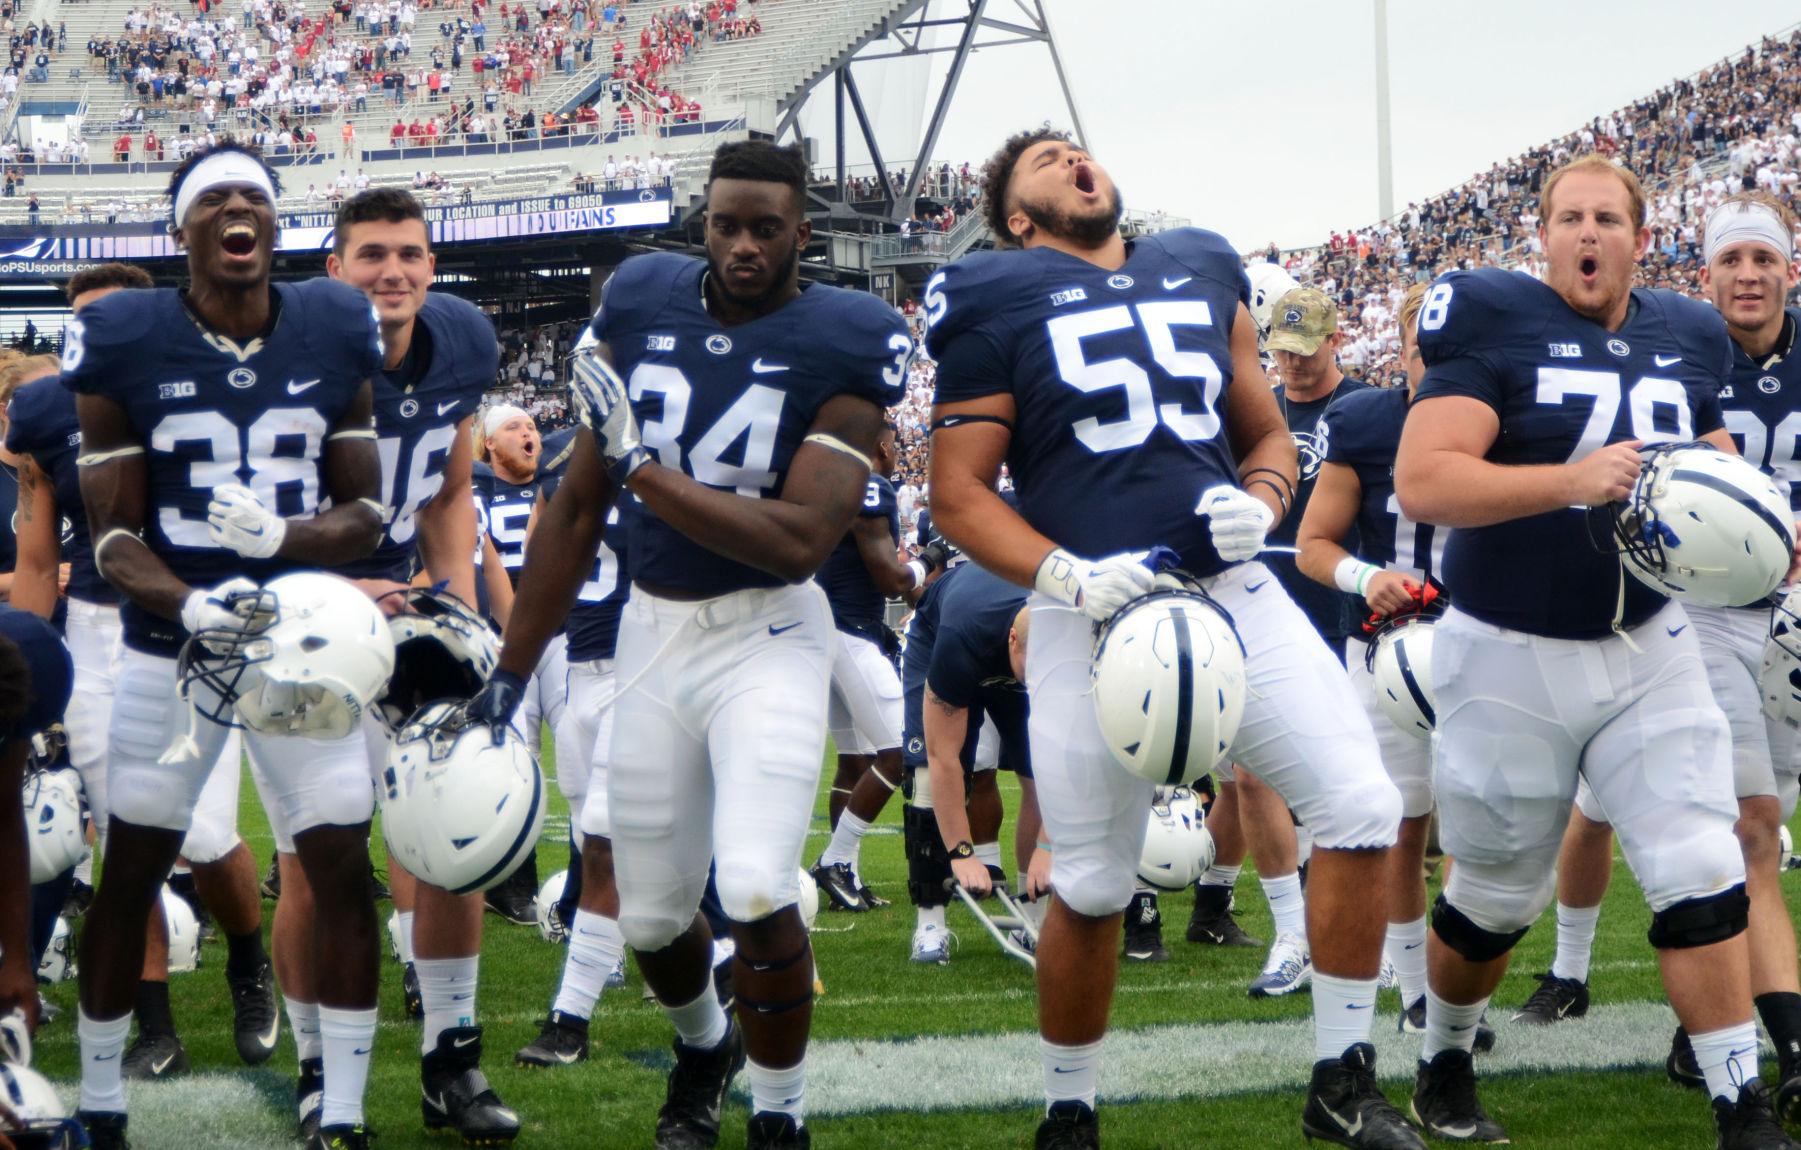 Penn State football players celebrate win over Iowa, post video of